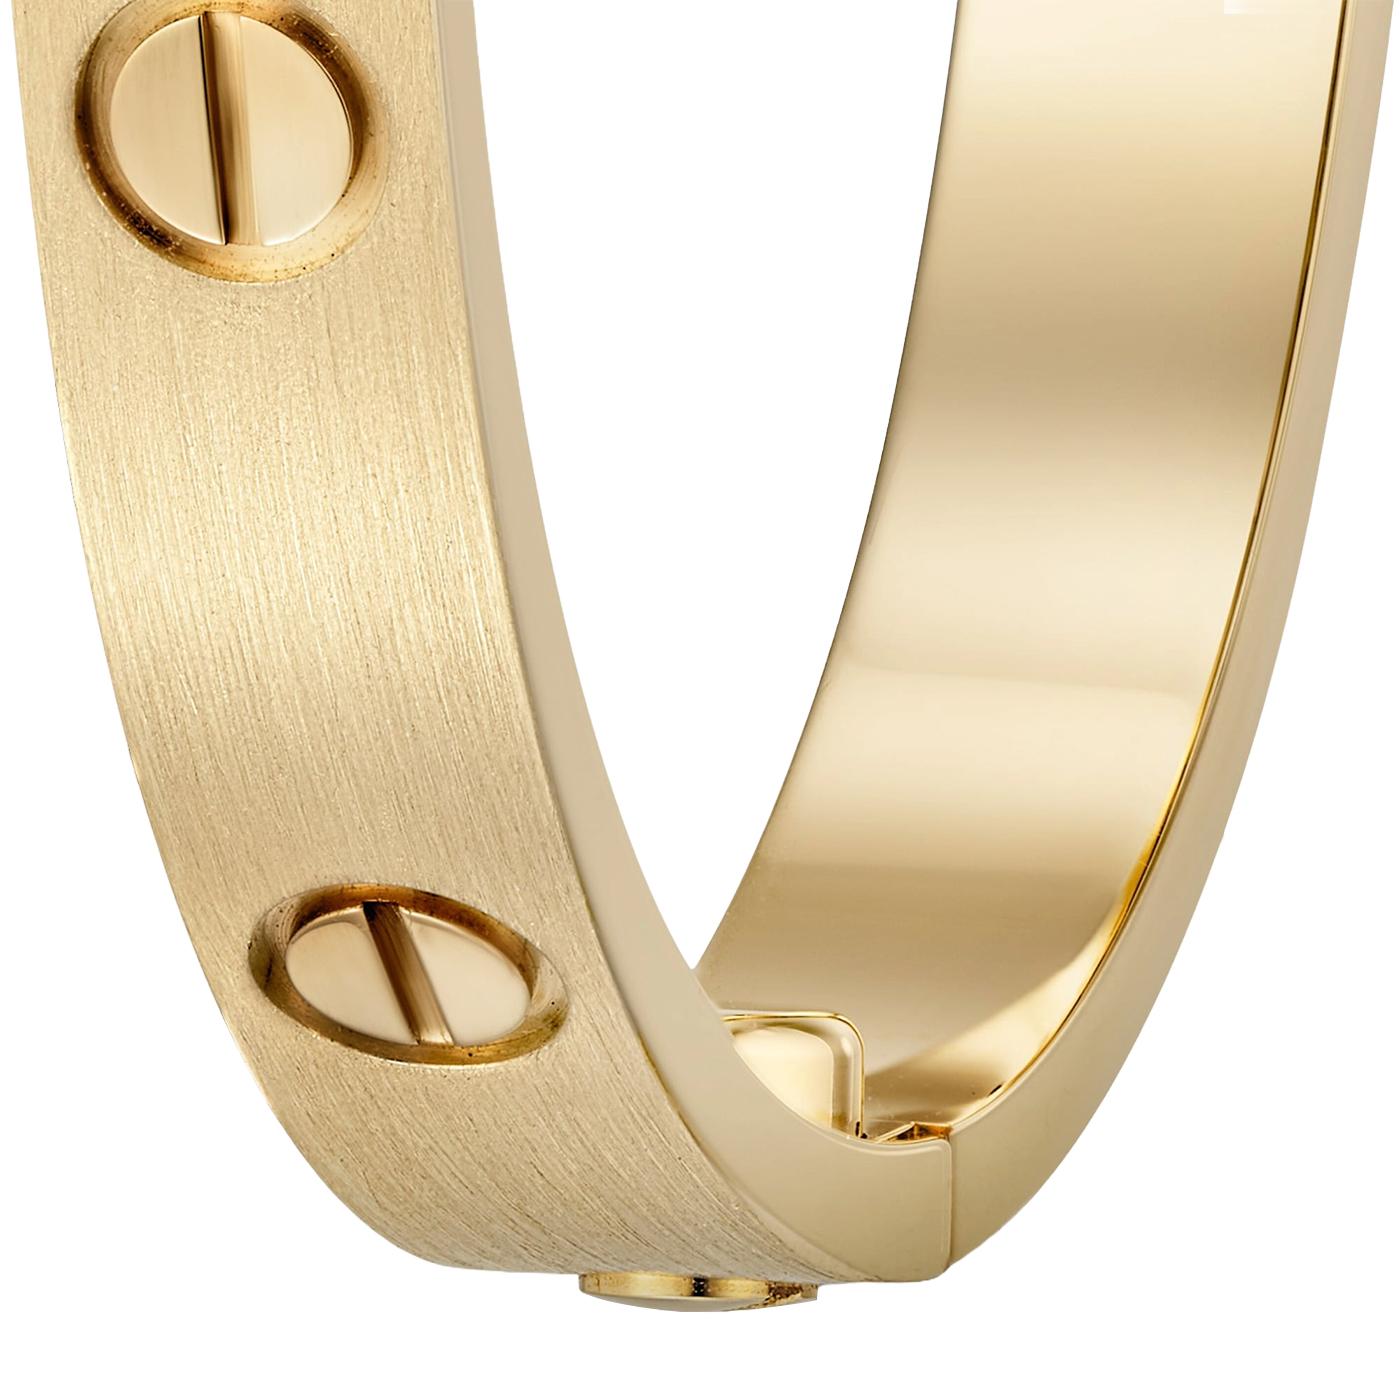 Modernist Cartier Love Bracelet 18K Yellow Gold Size 15 Brushed Finish with Screwdriver For Sale